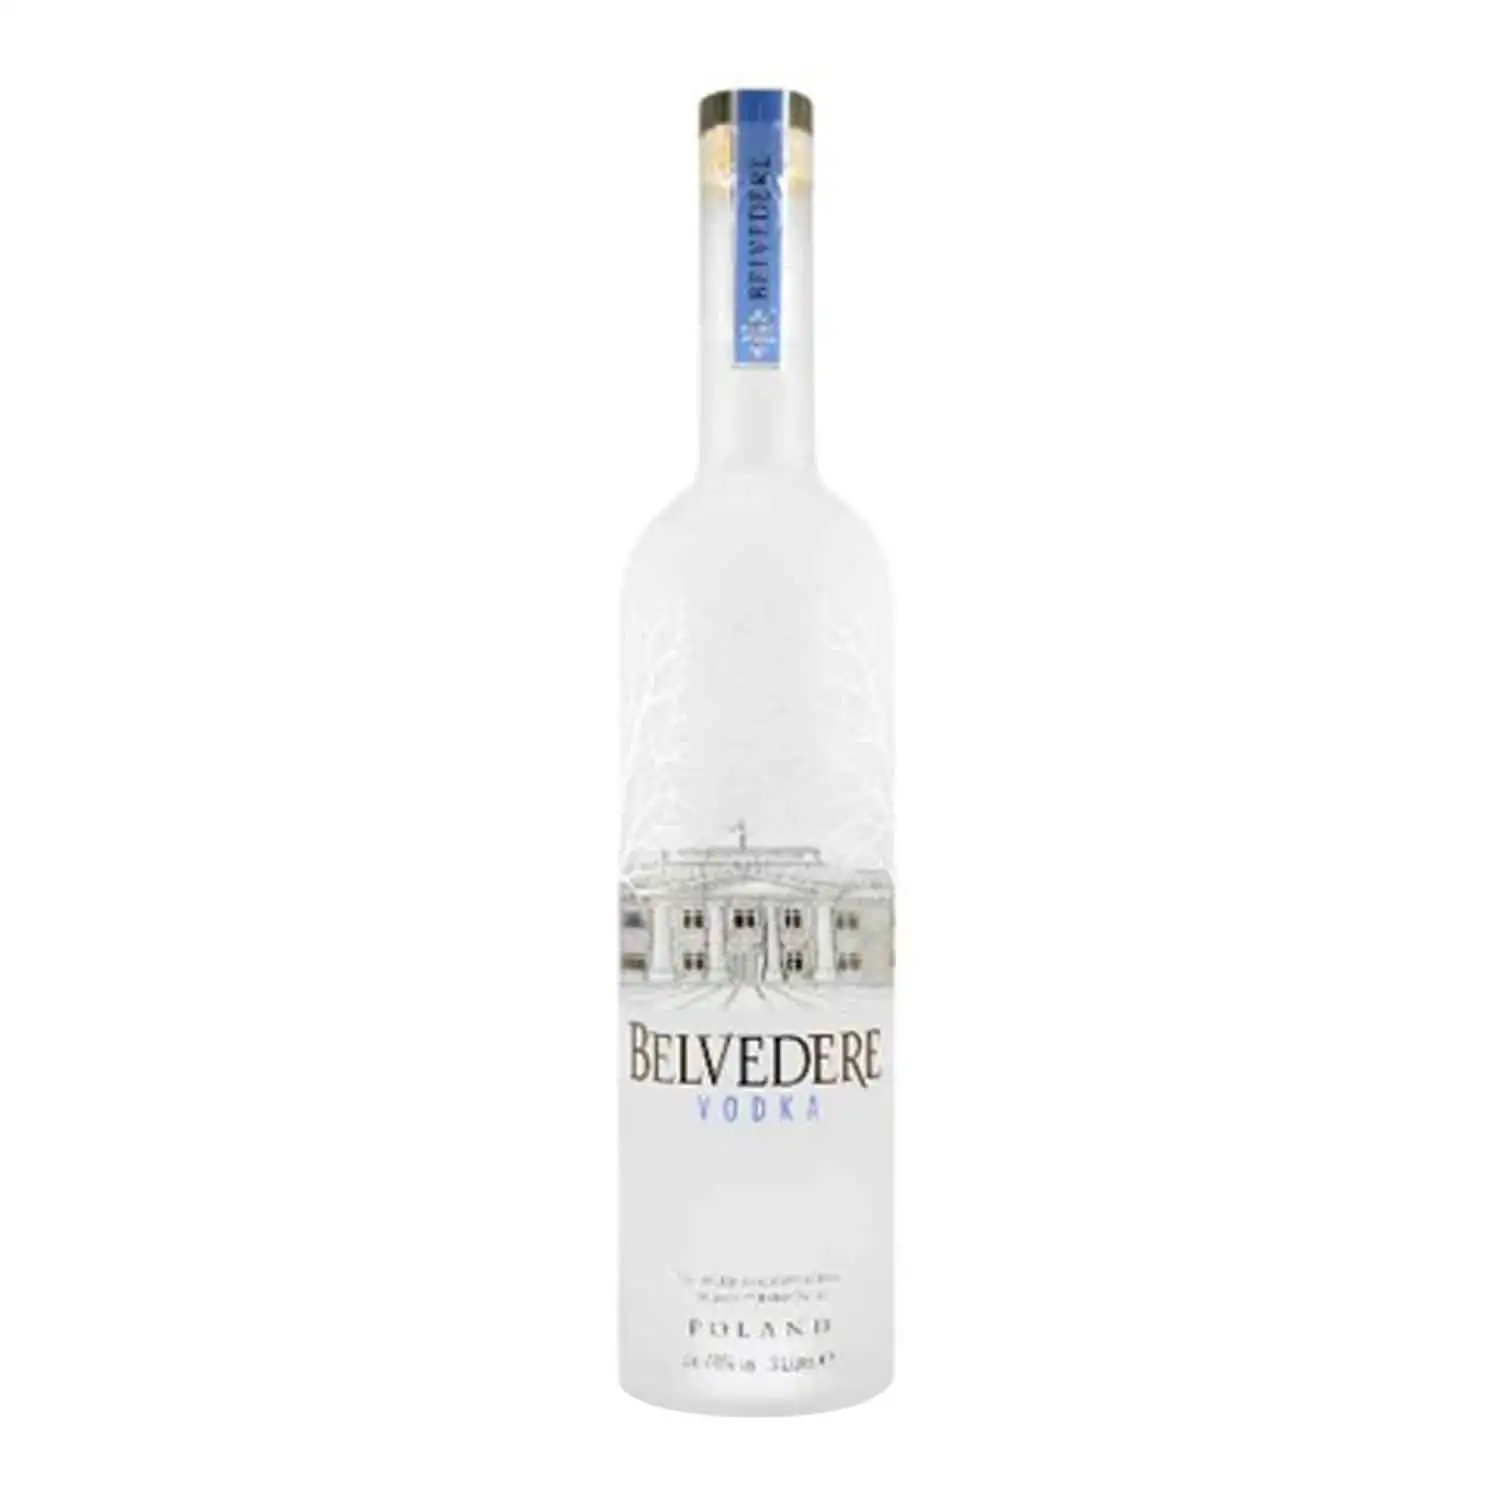 Belvedere 1,75l Alc 40% - Buy at Real Tobacco